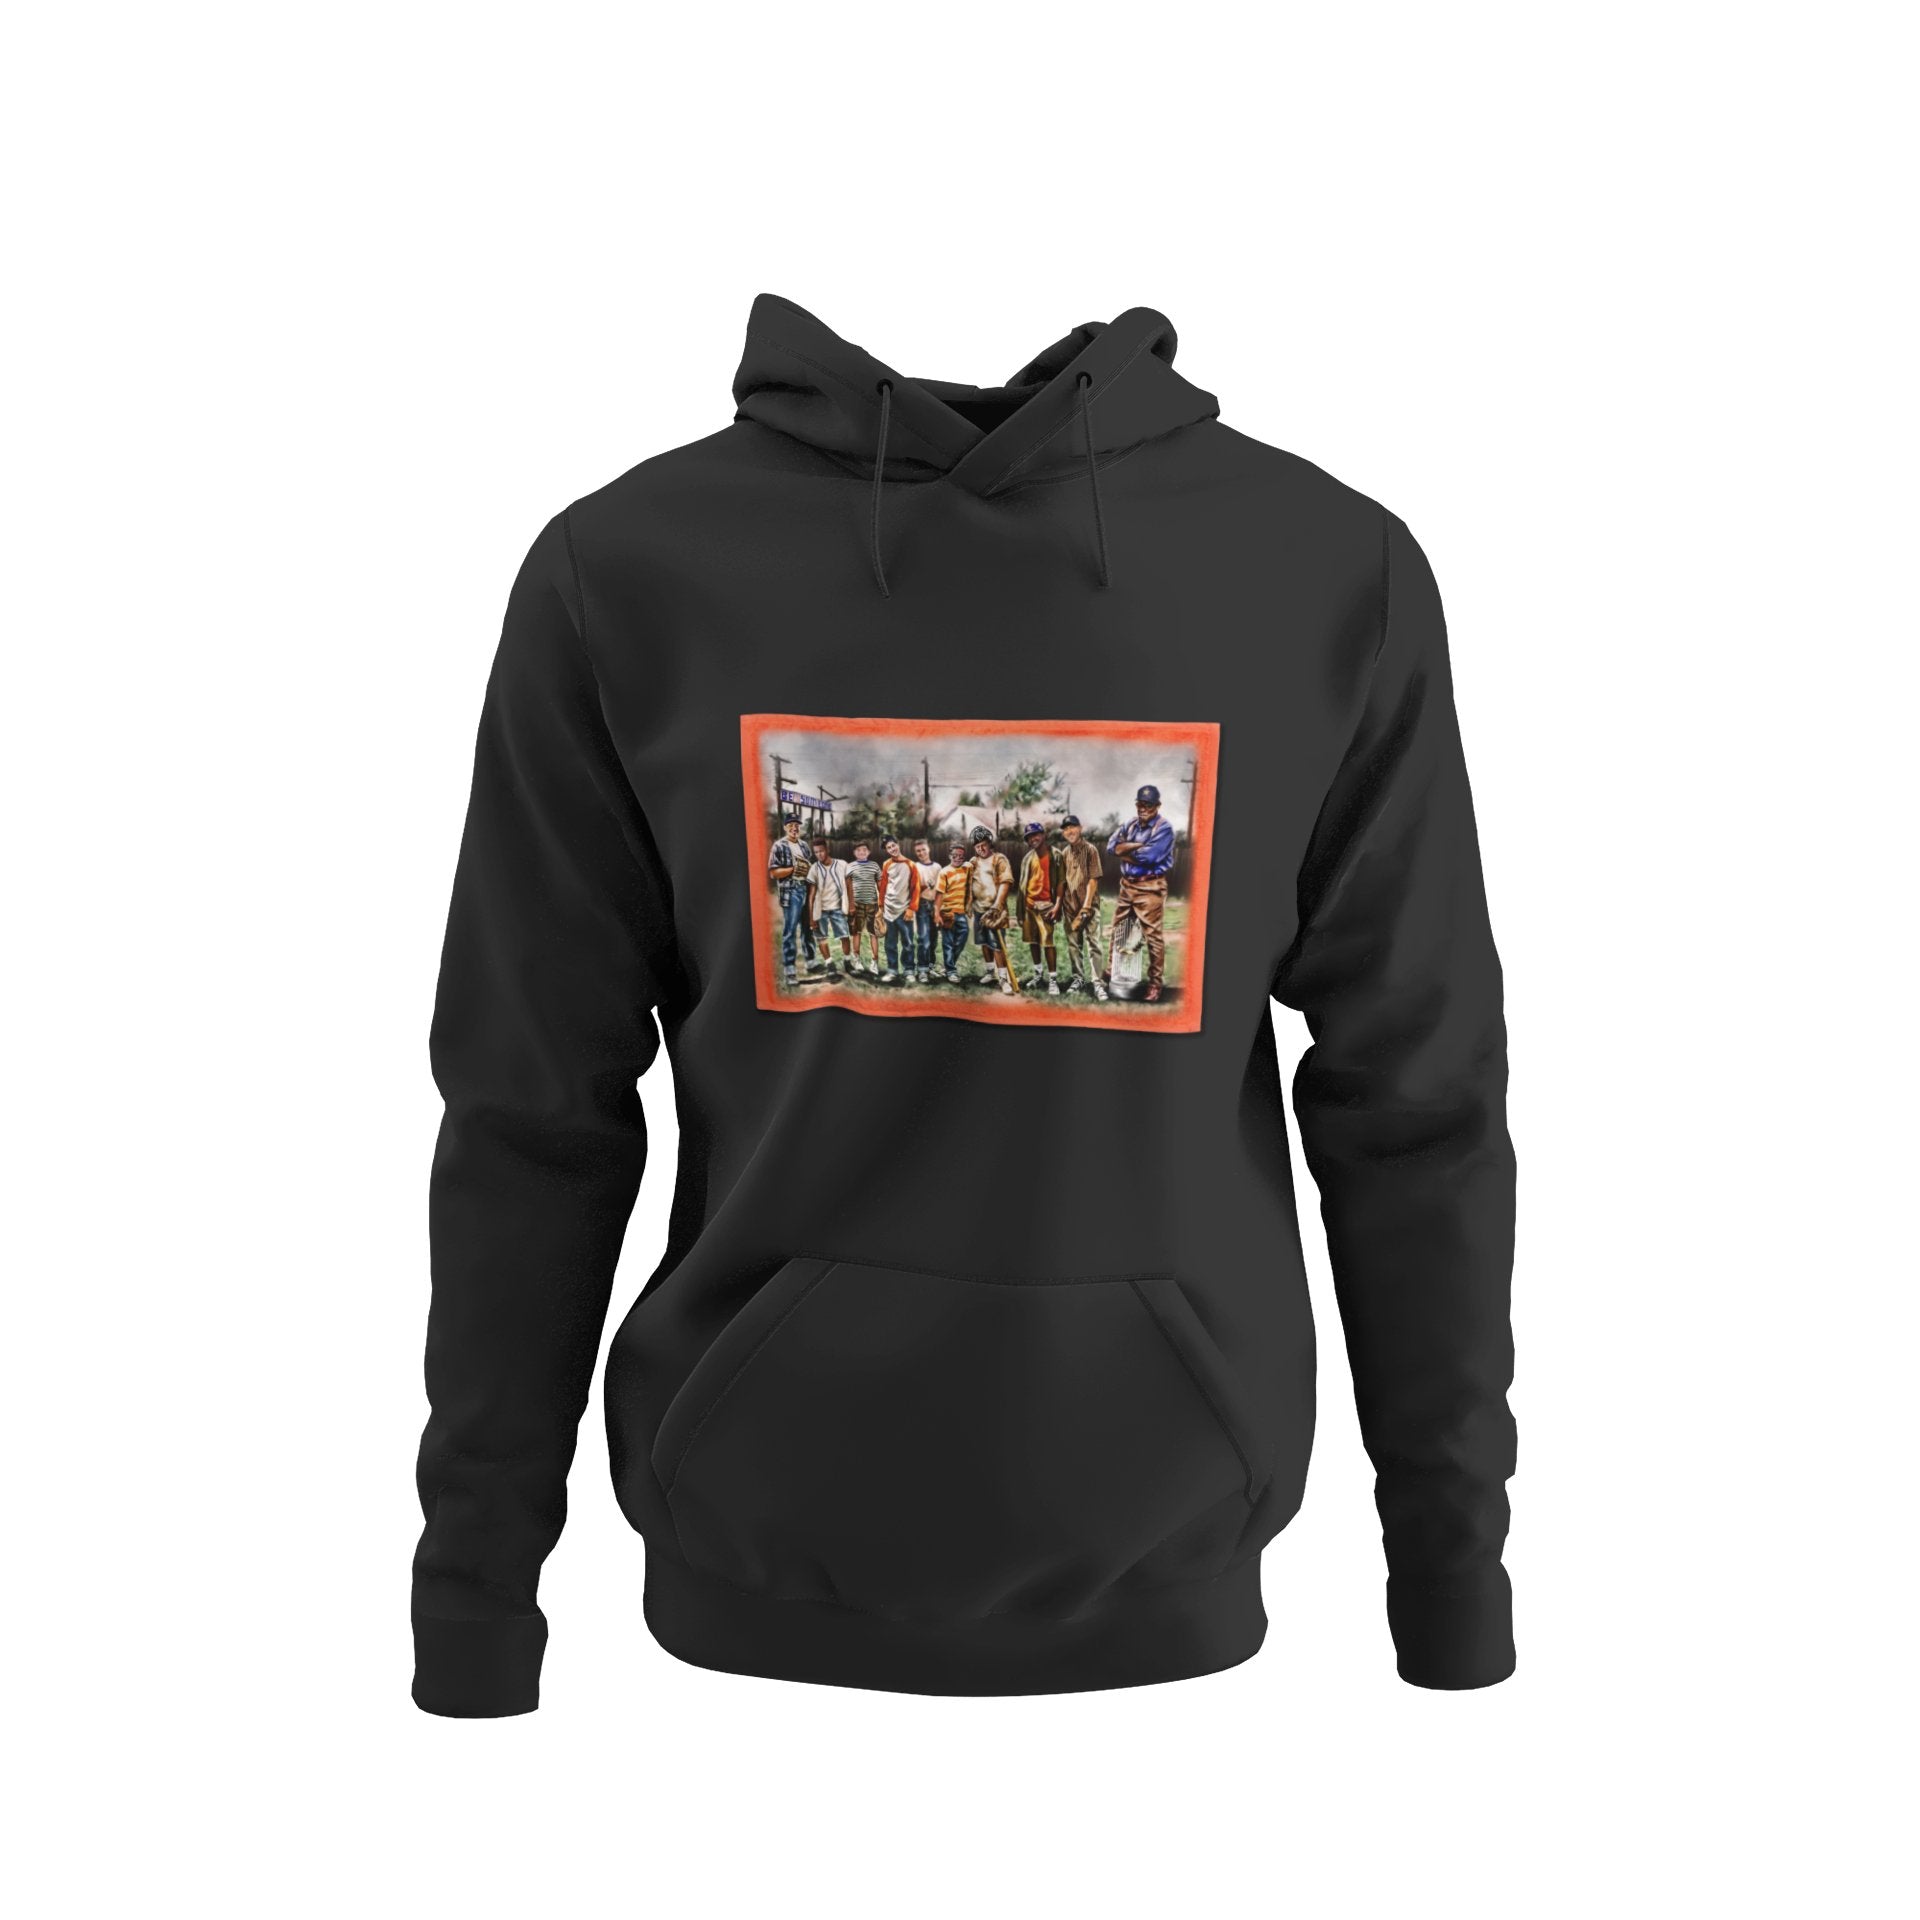 FOR-HOU-STON | Unisex Hoodie - Androo's Art